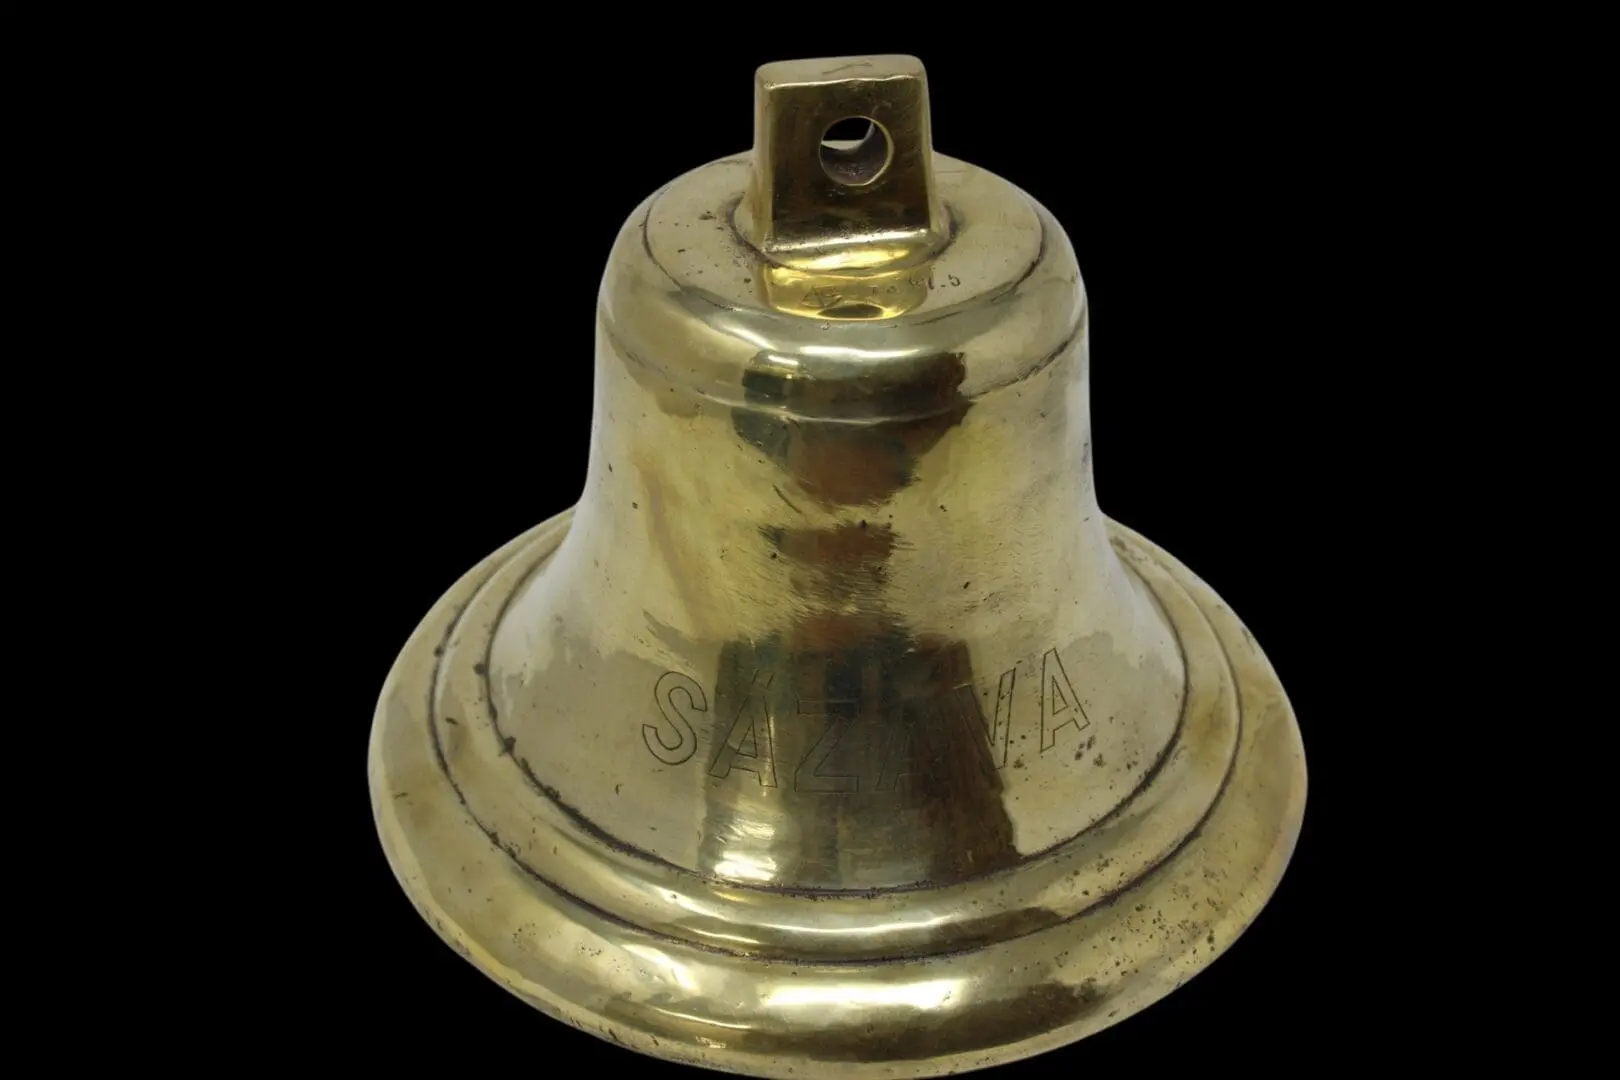 A close up of the top of a bell